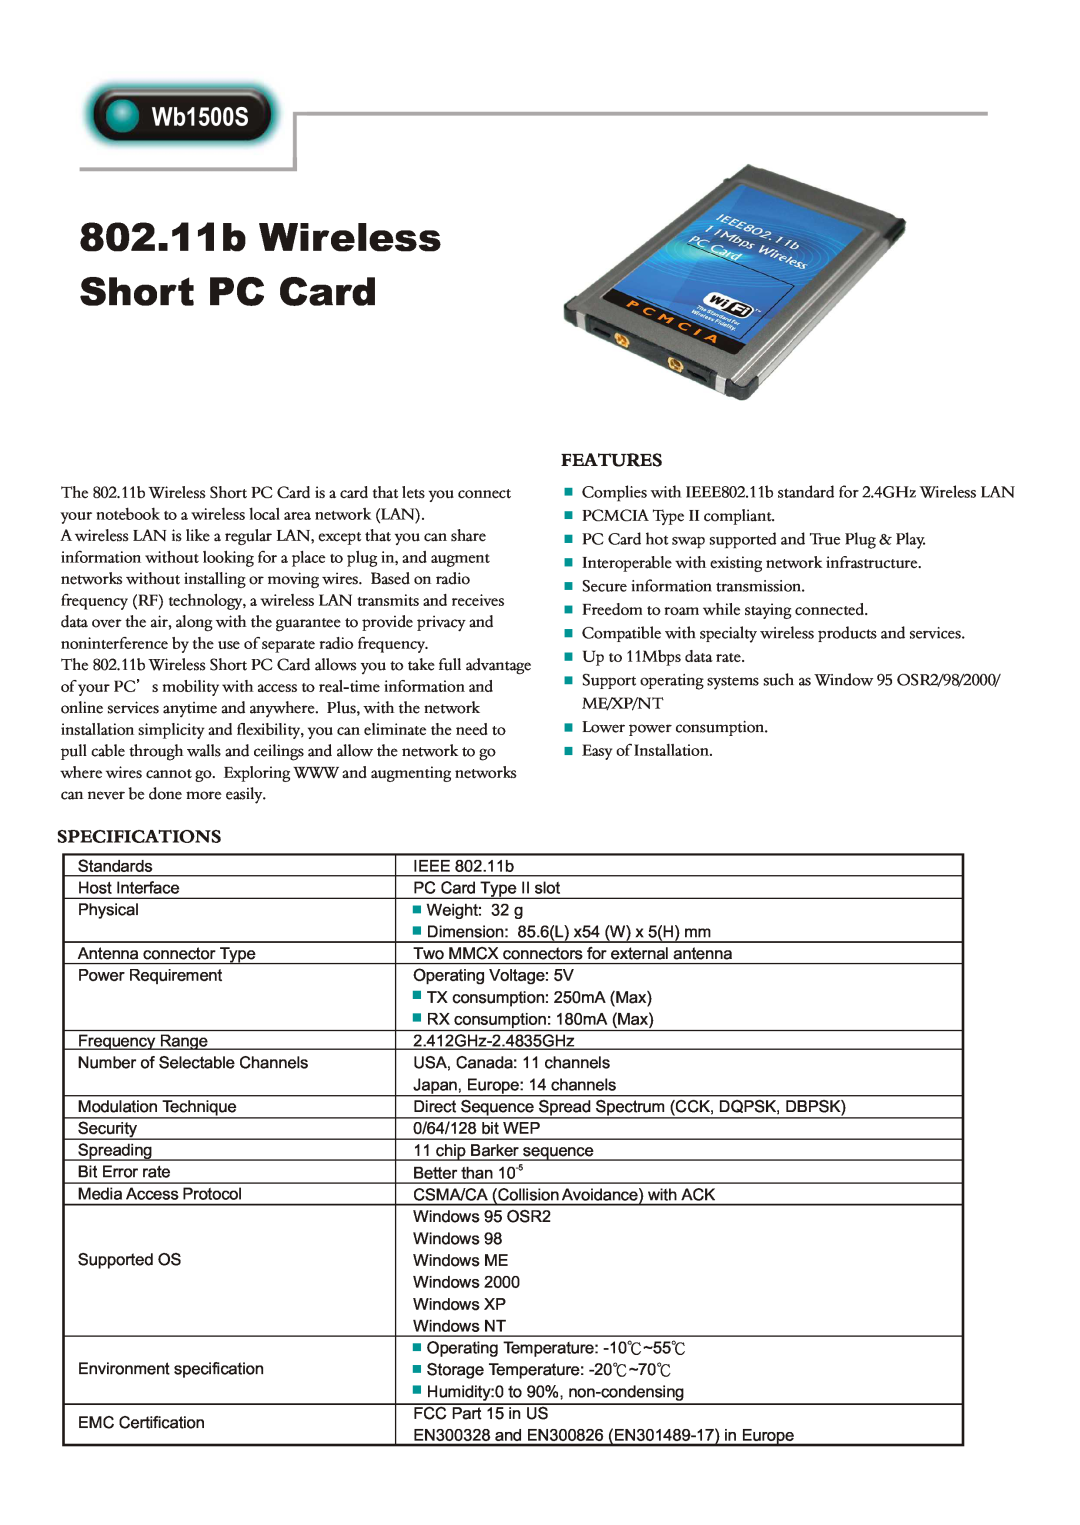 Abocom Wb1500S specifications 802.11b Wireless Short PC Card, Features, Specifications 